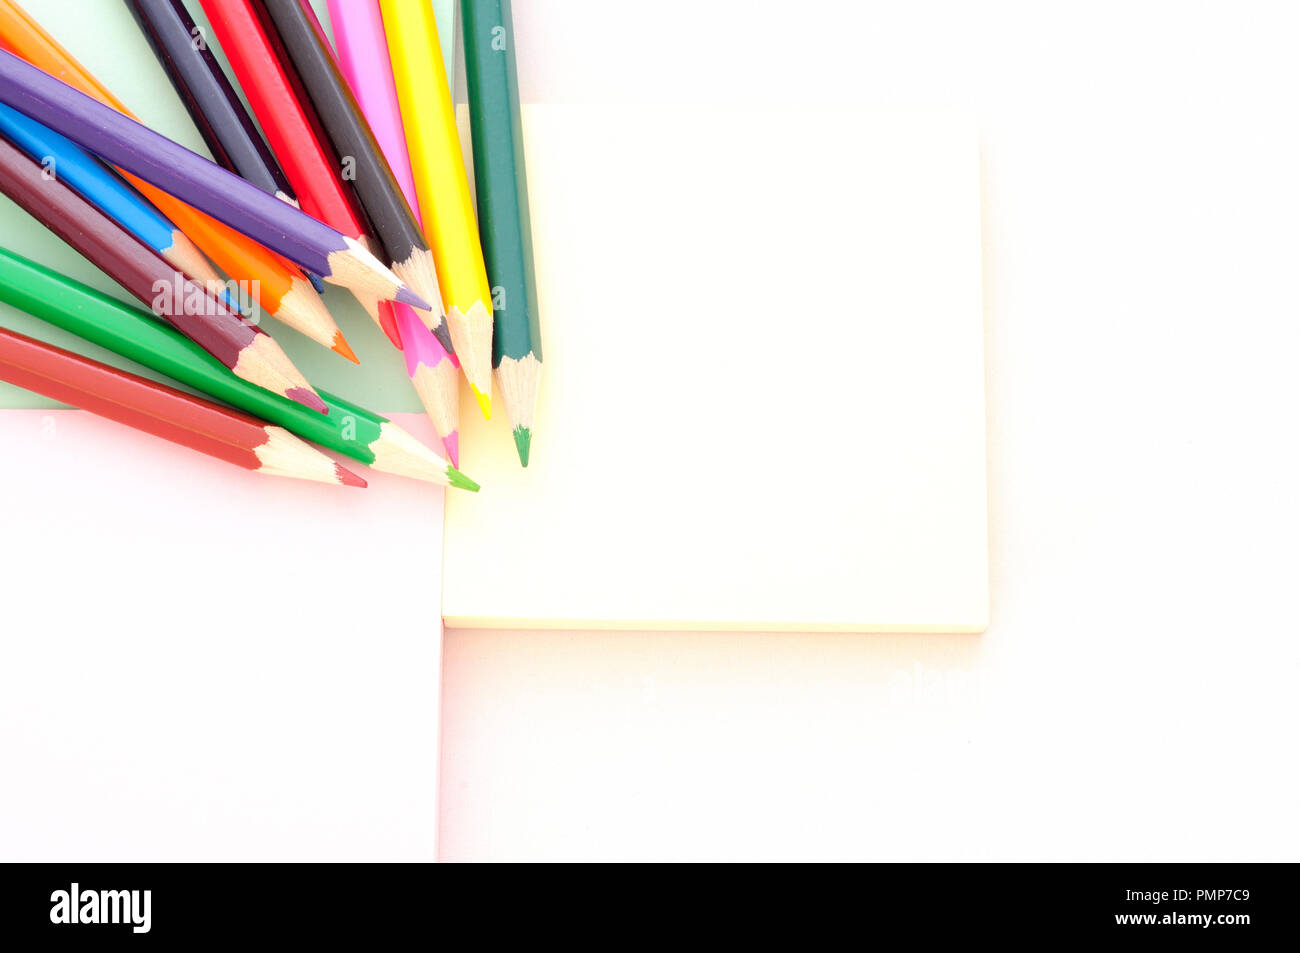 back to school, minimal background, pile of colored pencils viewed from above on a desk, large copy space Stock Photo